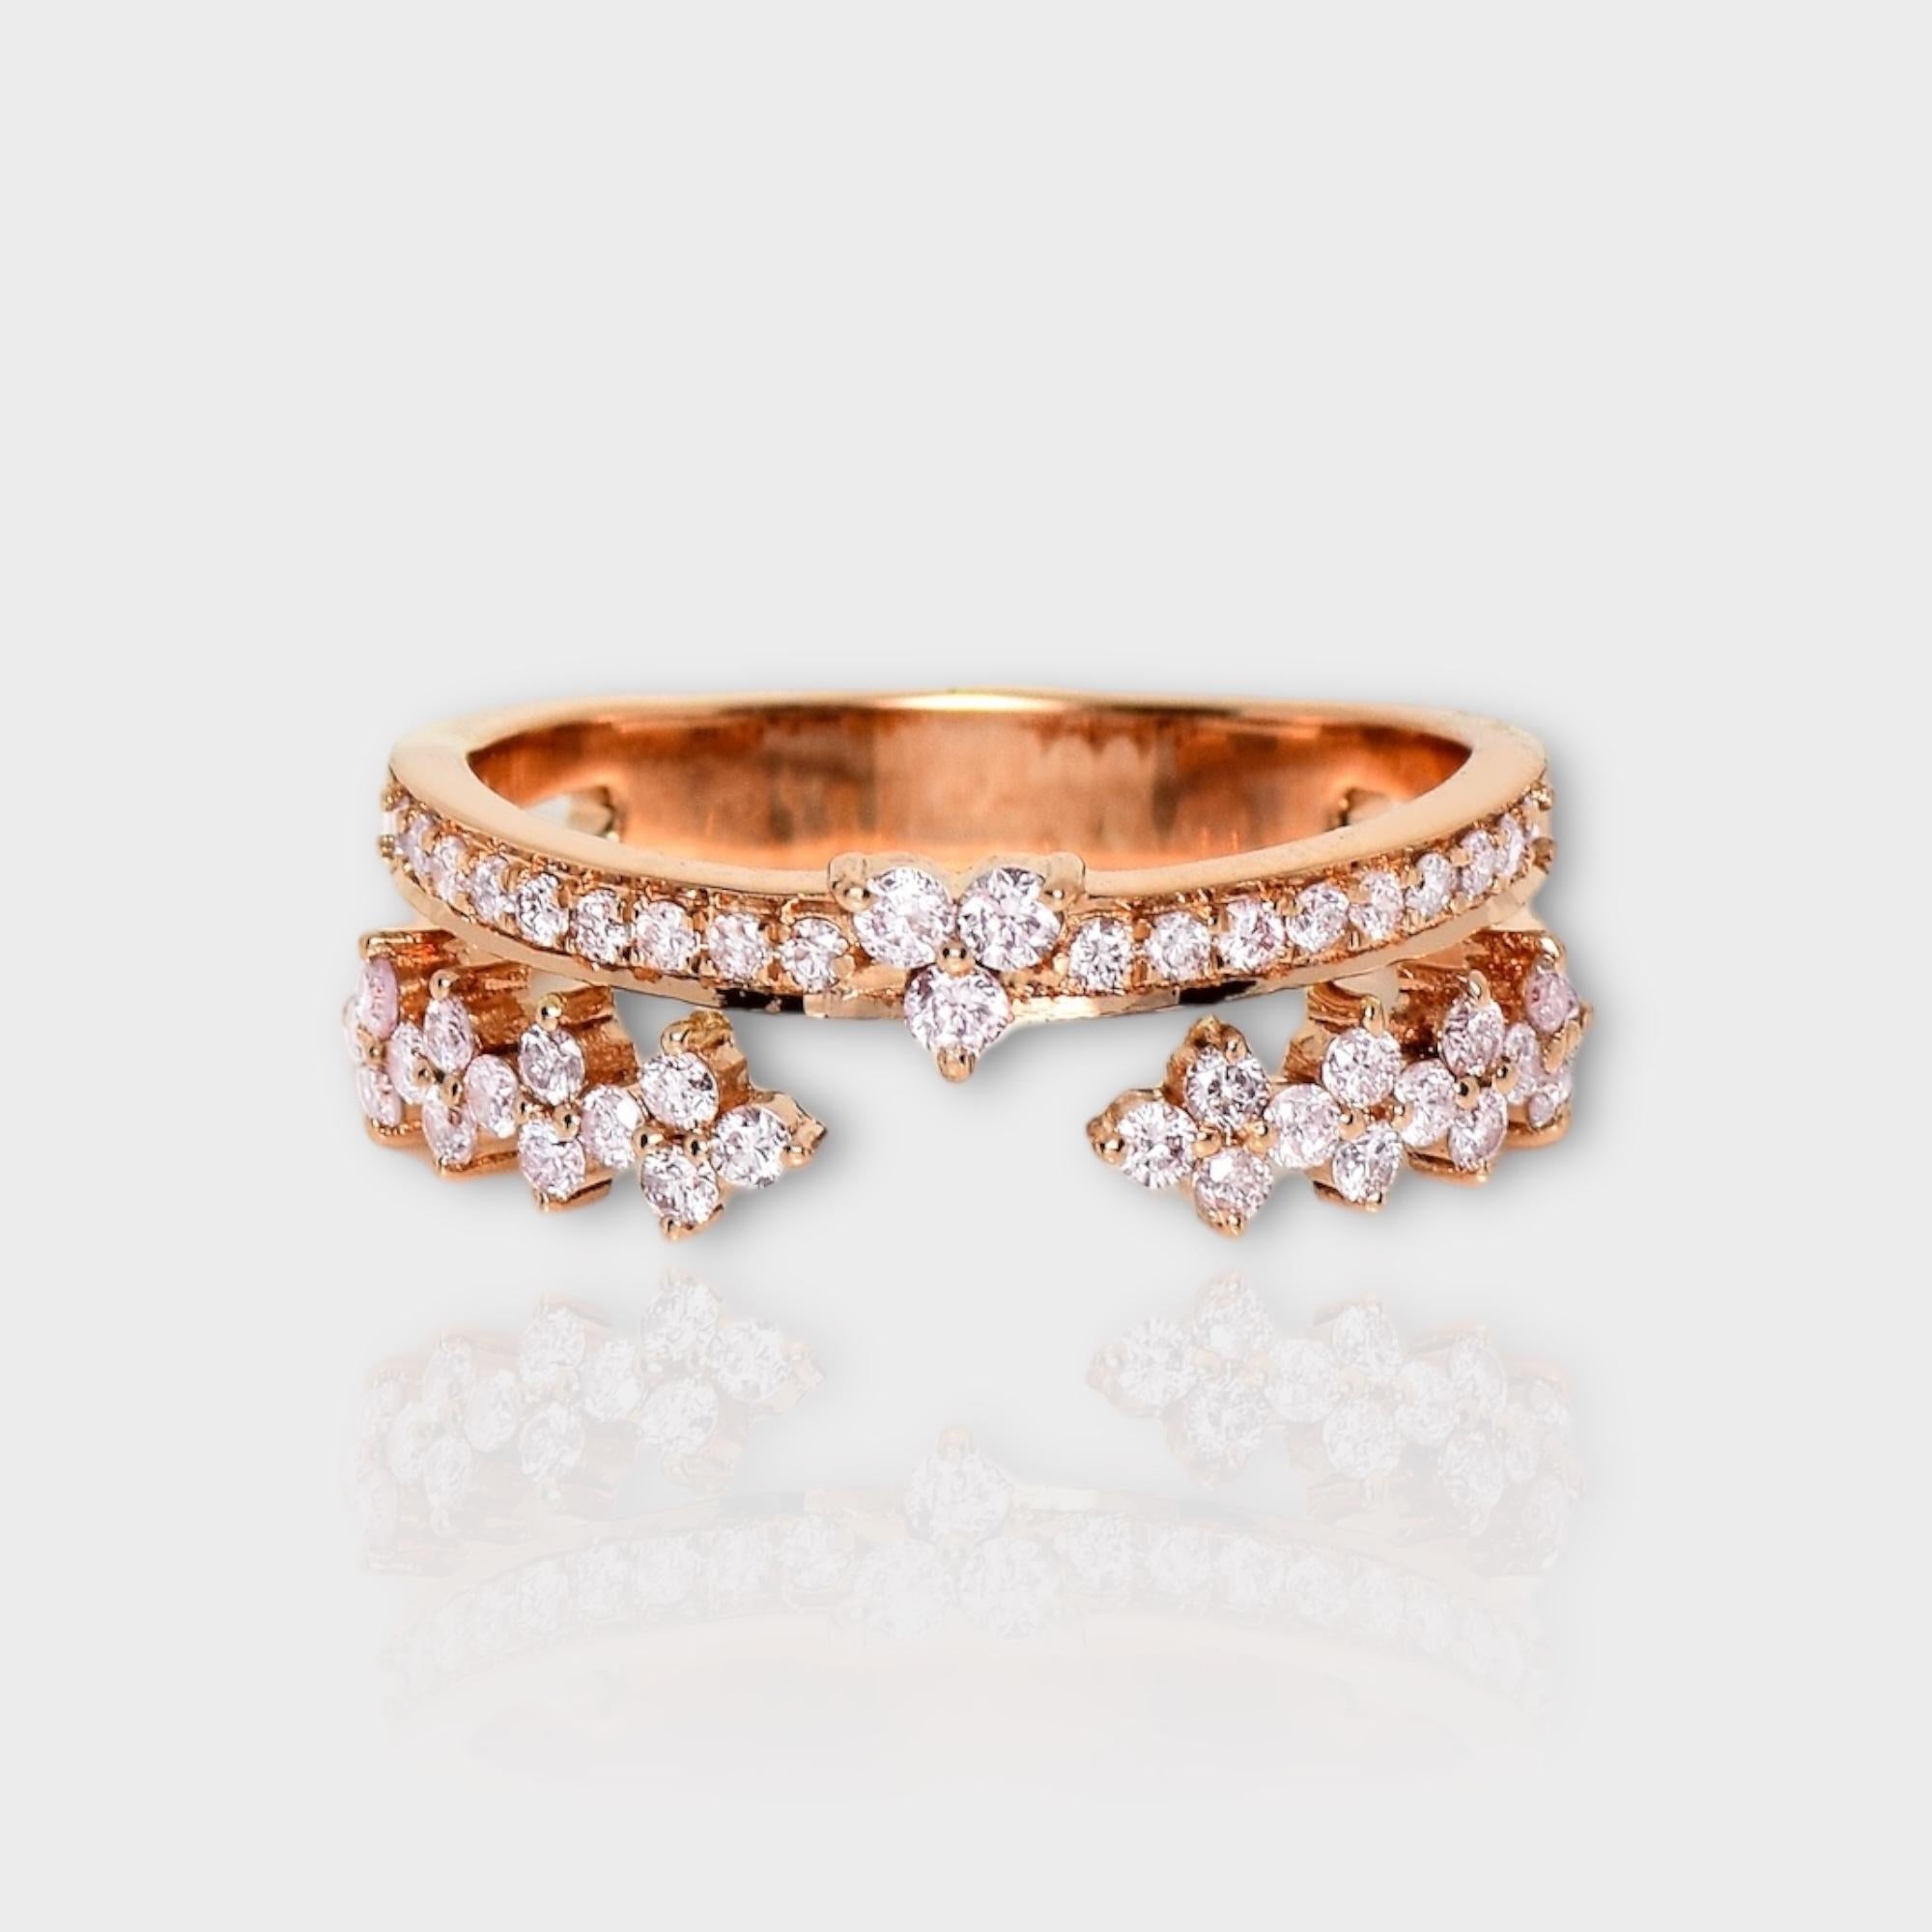 *IGI 14K 0.51 ct Natural Pink Diamonds Vintage Crown  Design Engagement Ring*

This band features a stunning design with a vintage crown crafted from 14K rose gold. It is set with natural pink diamonds weighing 0.51 carats.

This ring features